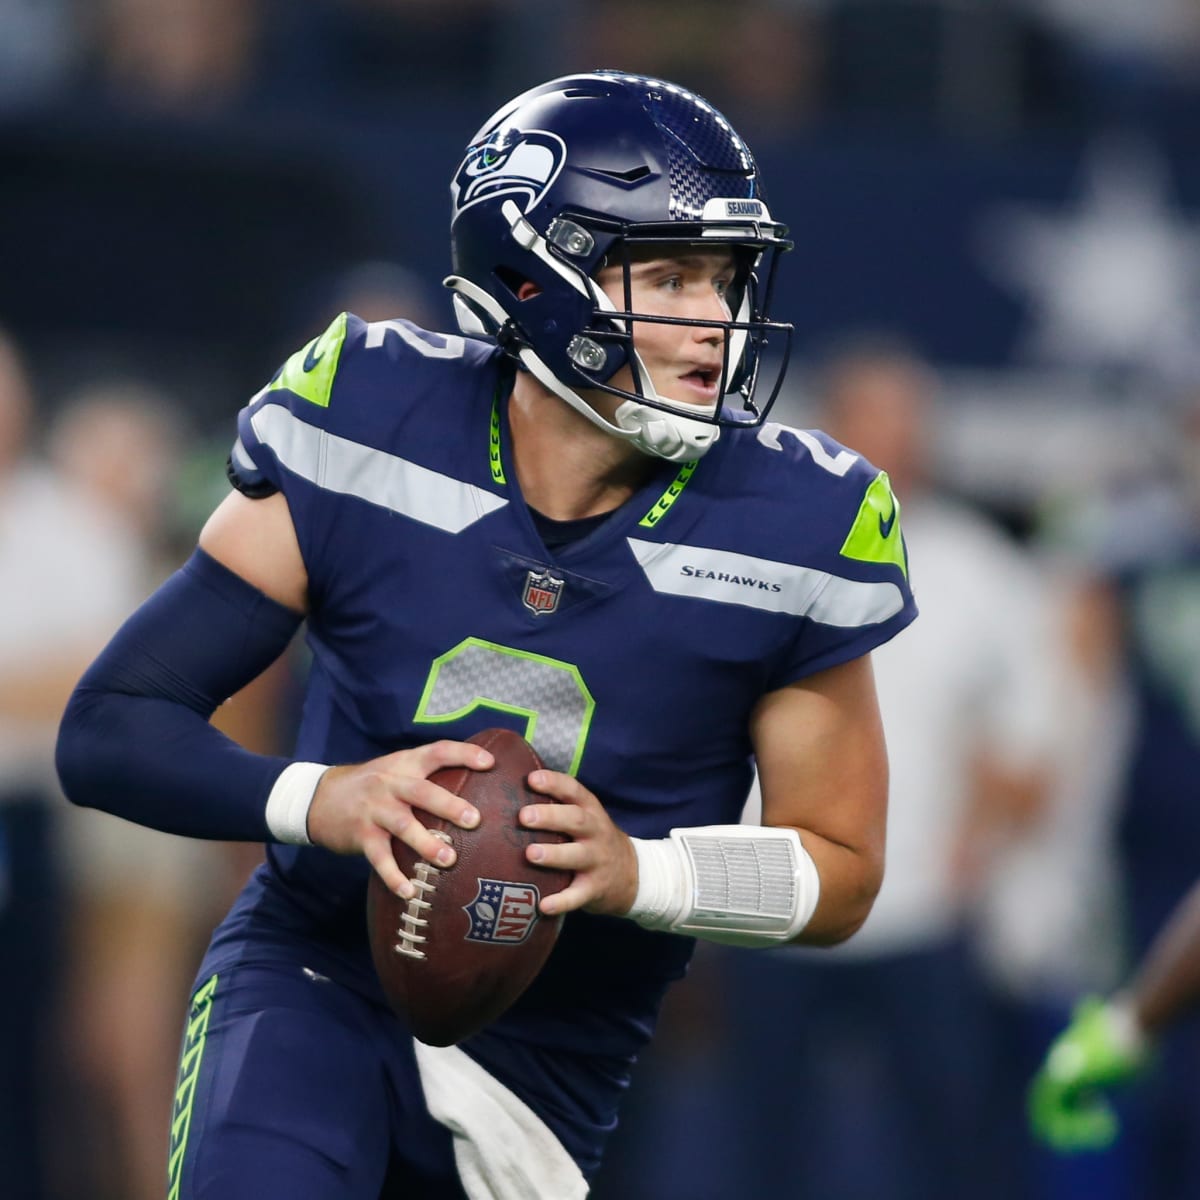 Drew lock playing for seattle seahawks